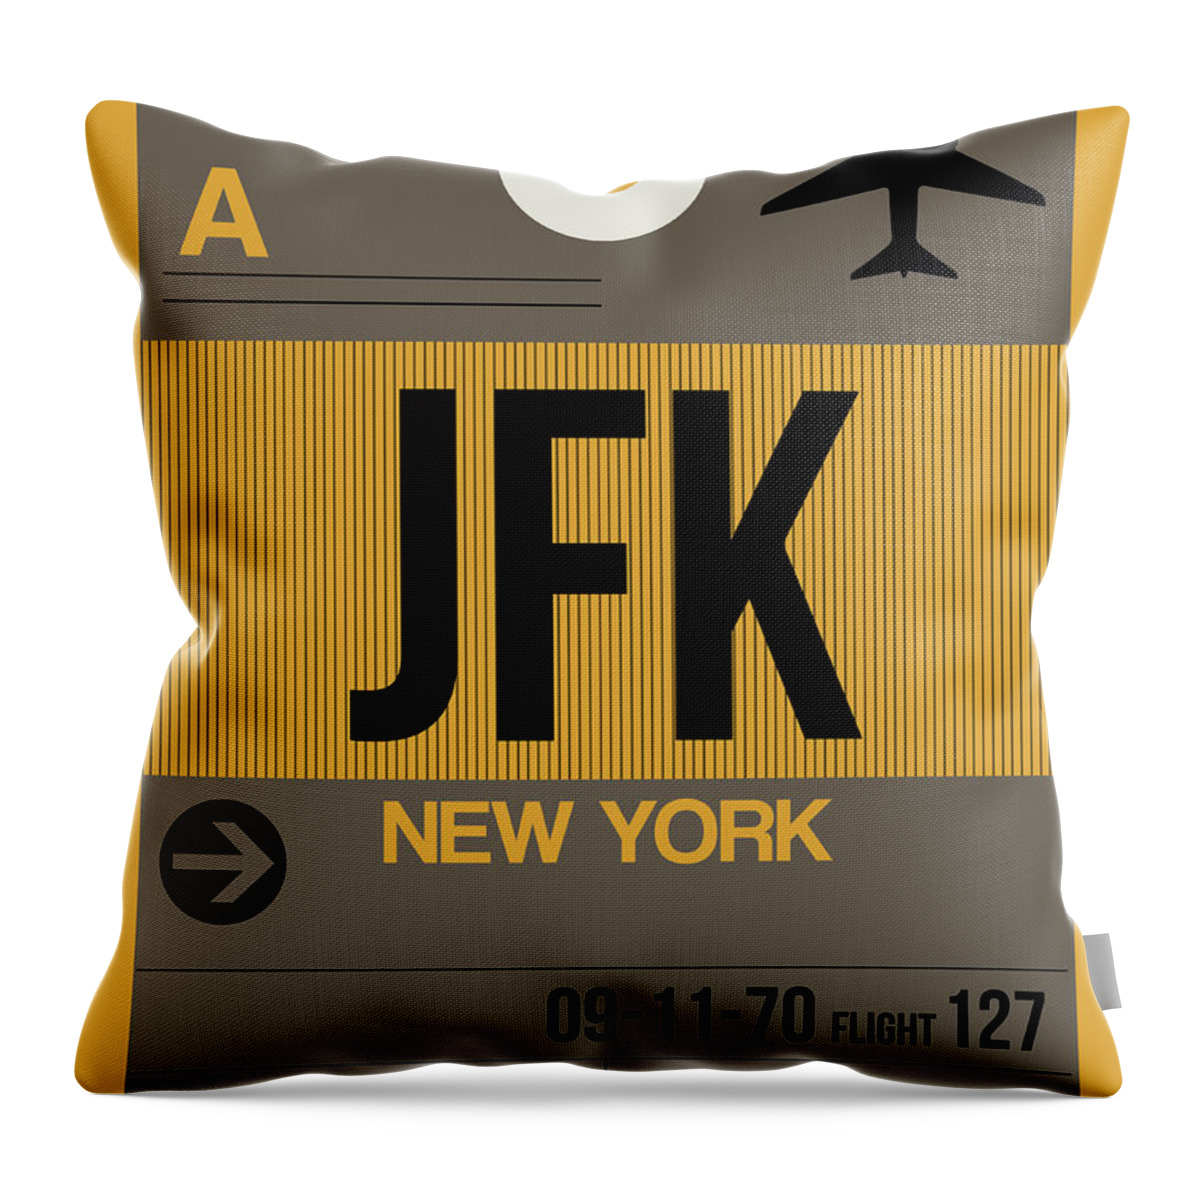 New York Throw Pillow featuring the digital art New York Luggage Tag Poster 3 by Naxart Studio